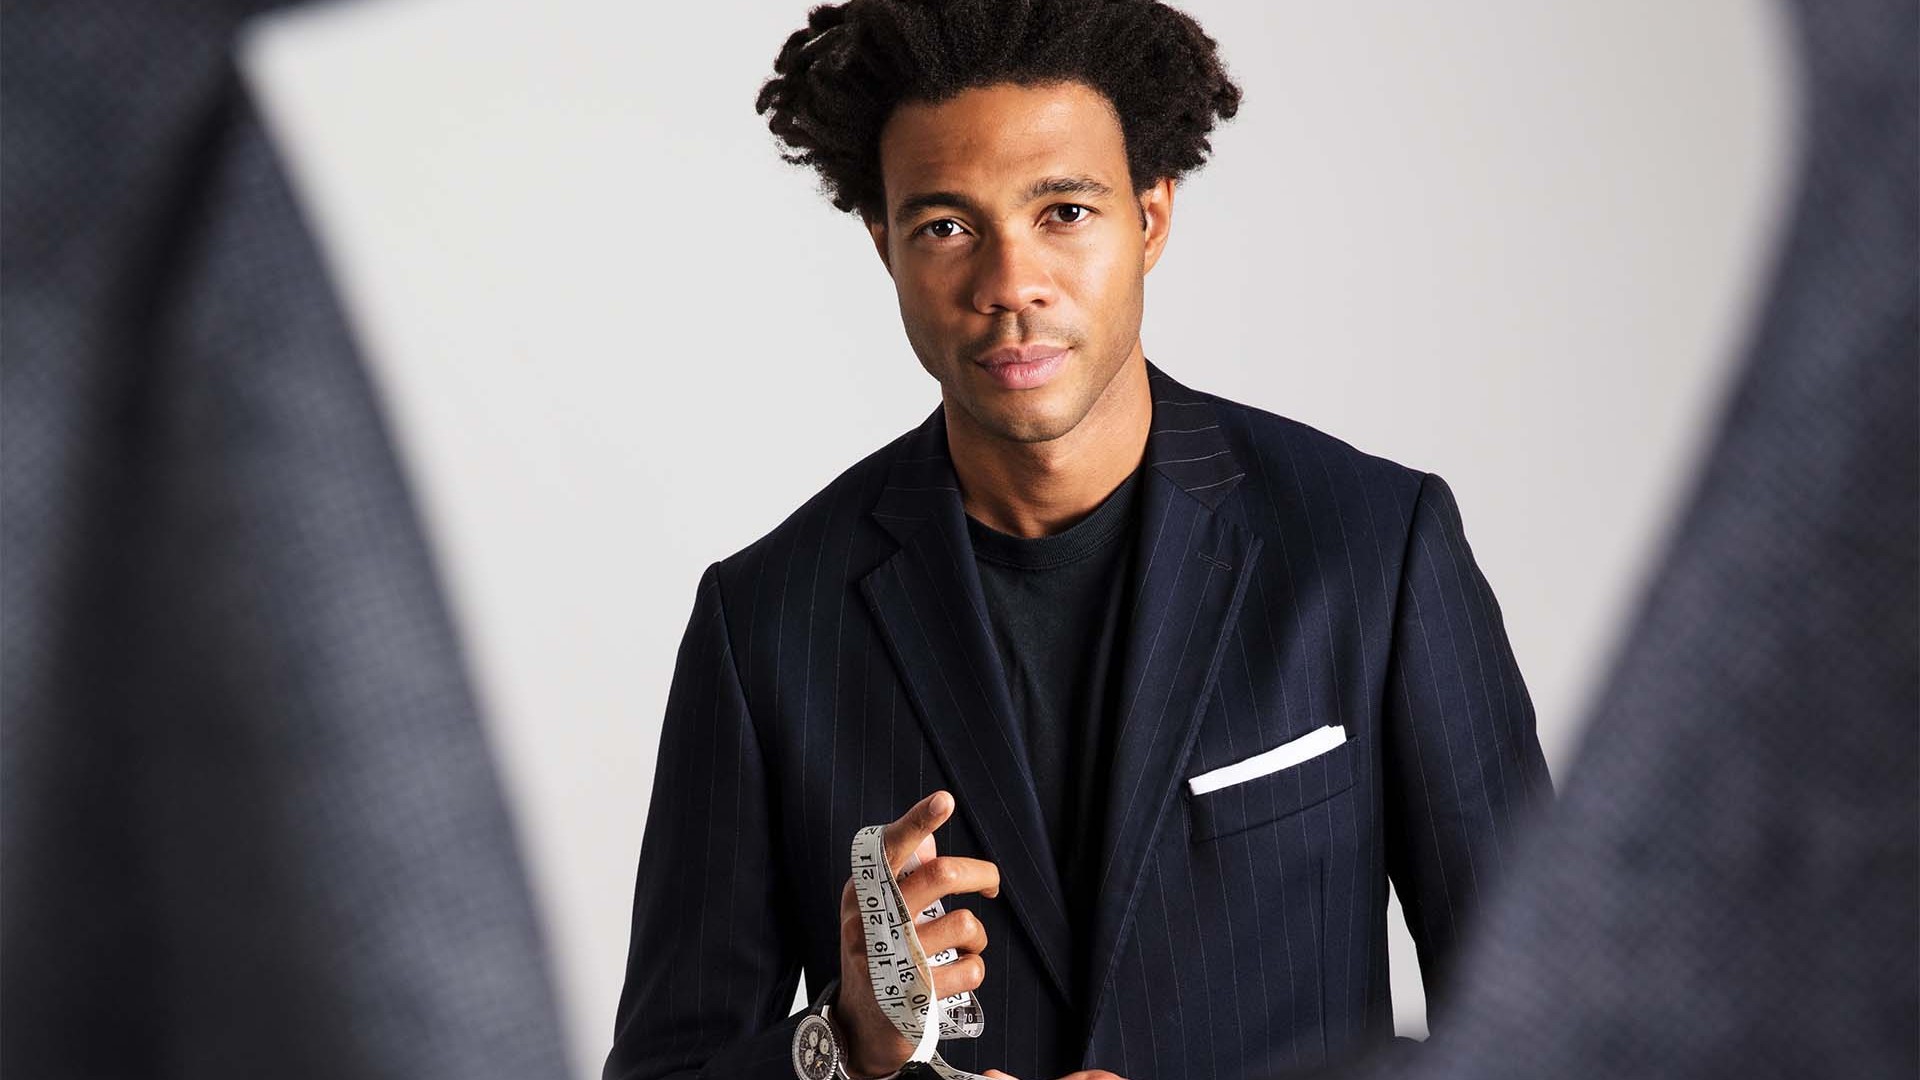 Designer Charlie Casely-Hayford talks style, music, and the future of